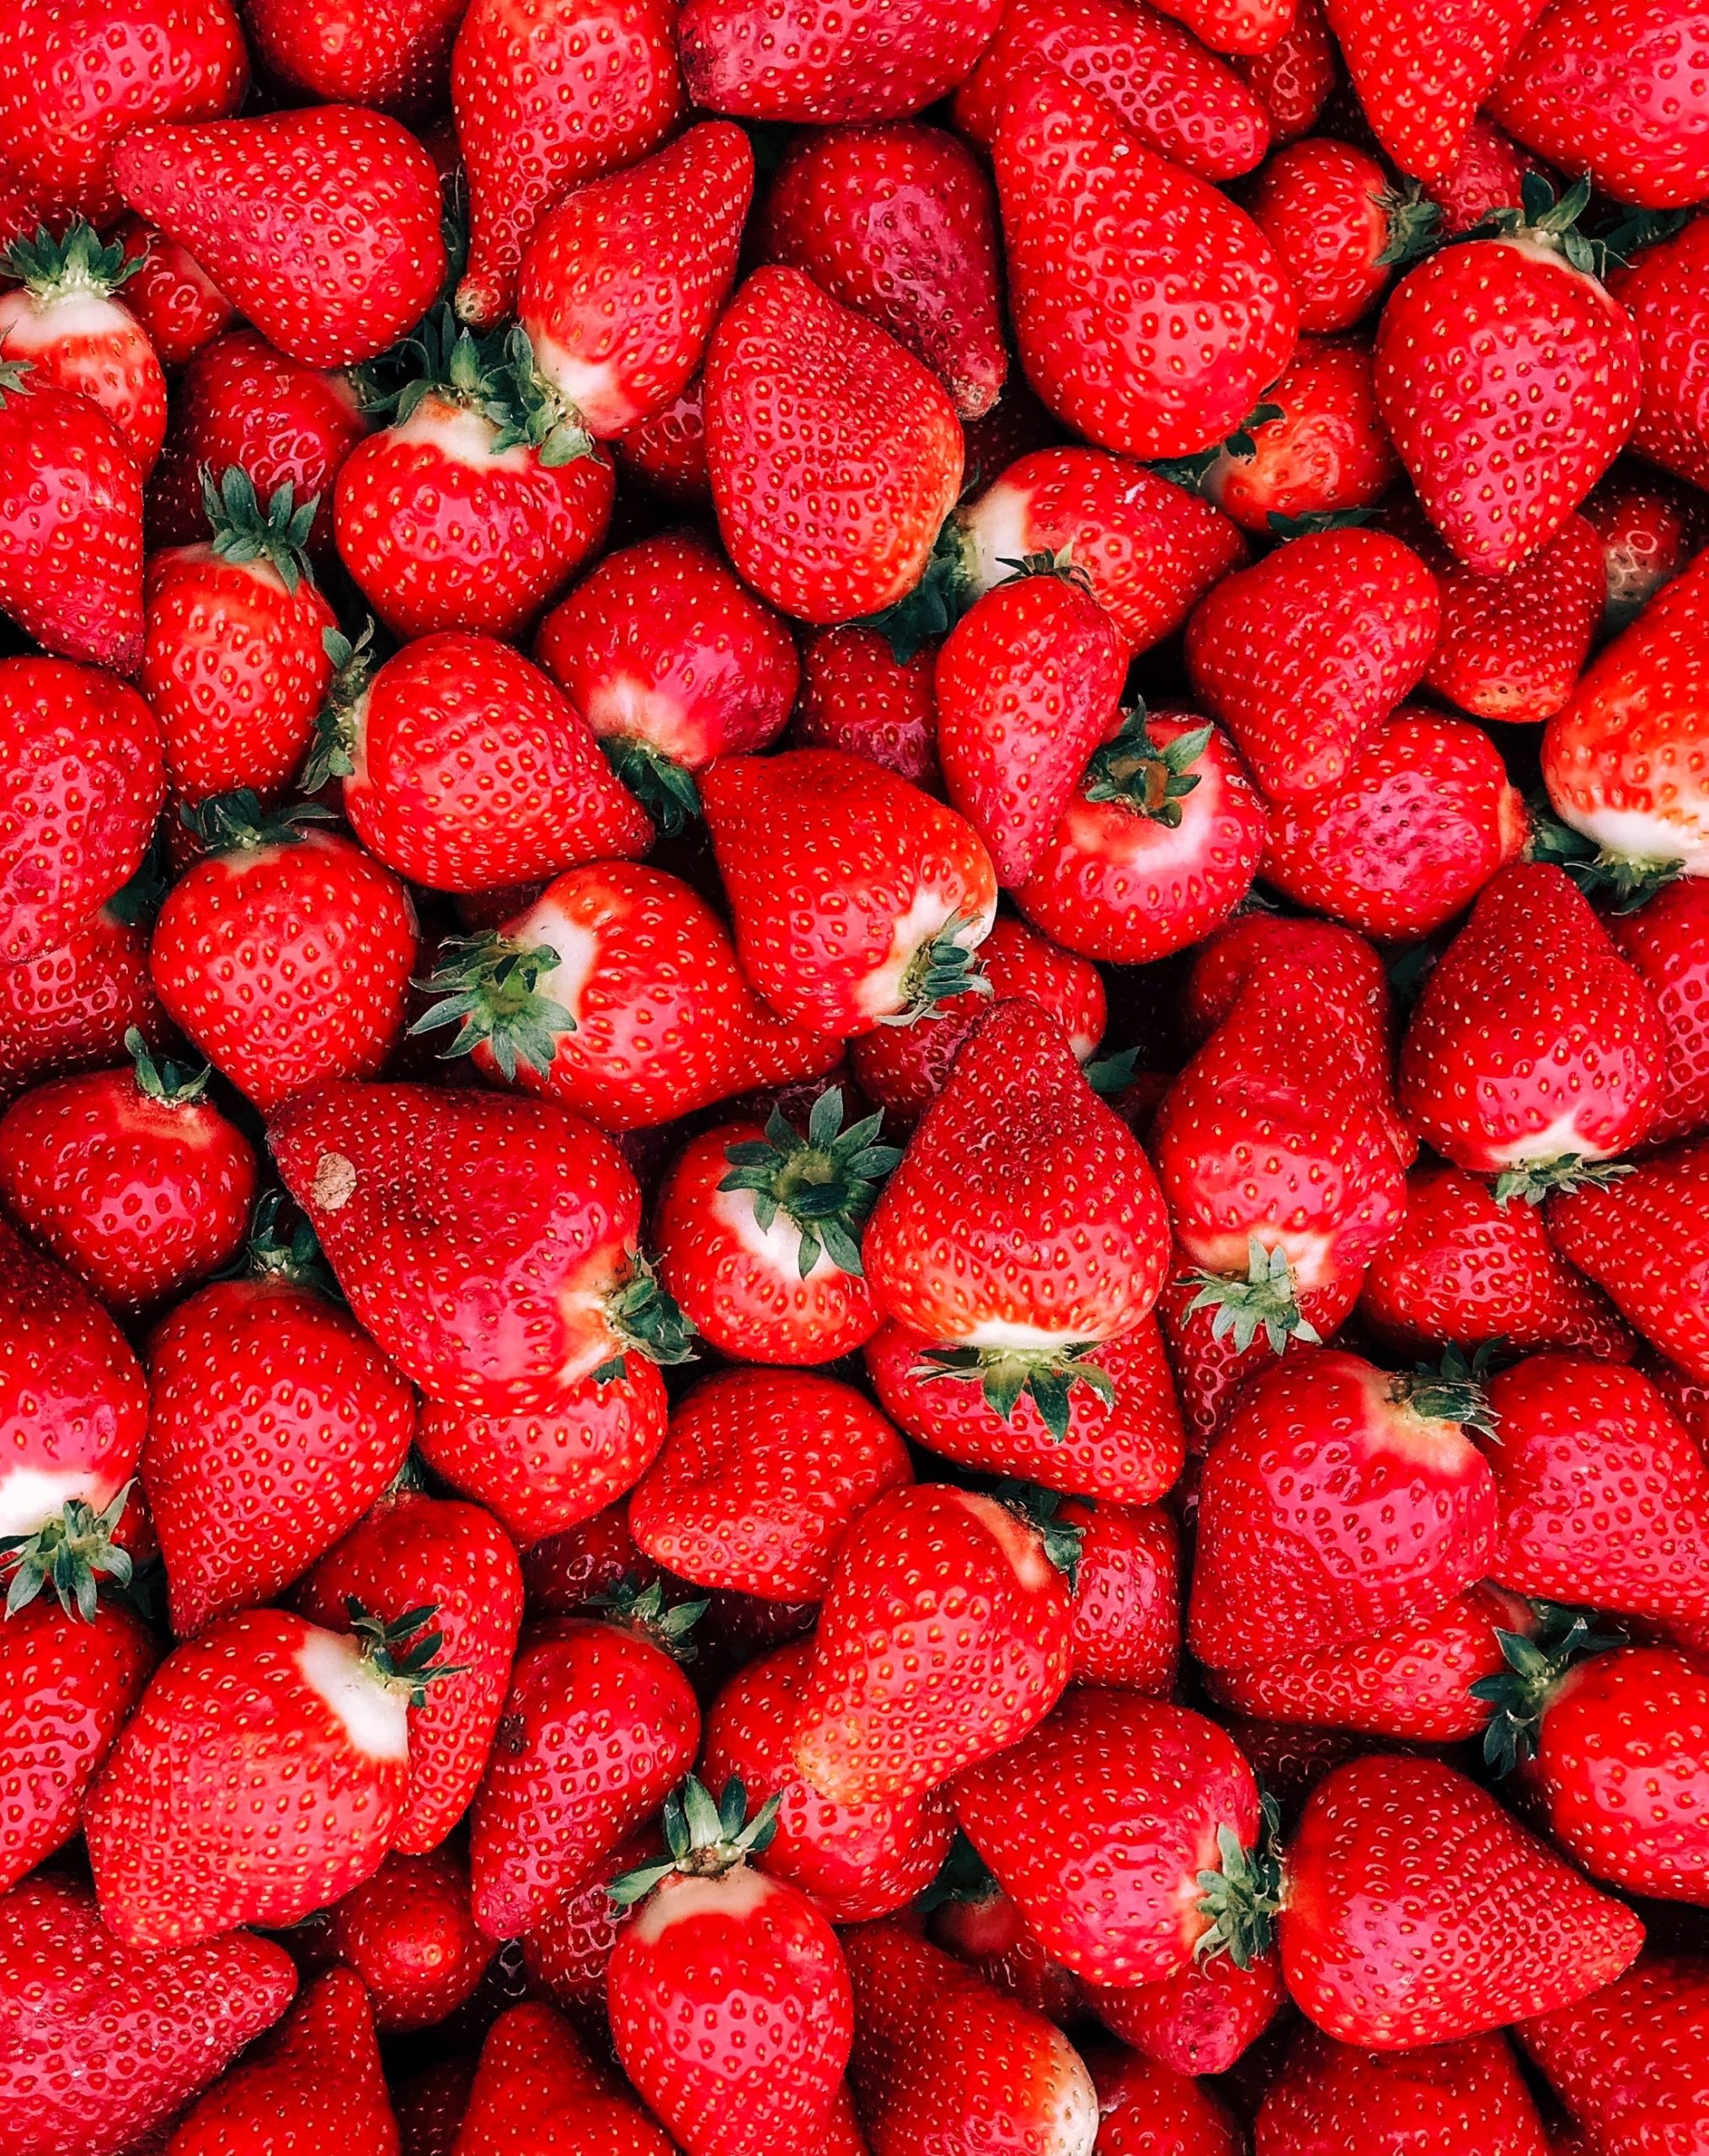 Different ways to incorporate strawberries into your diet